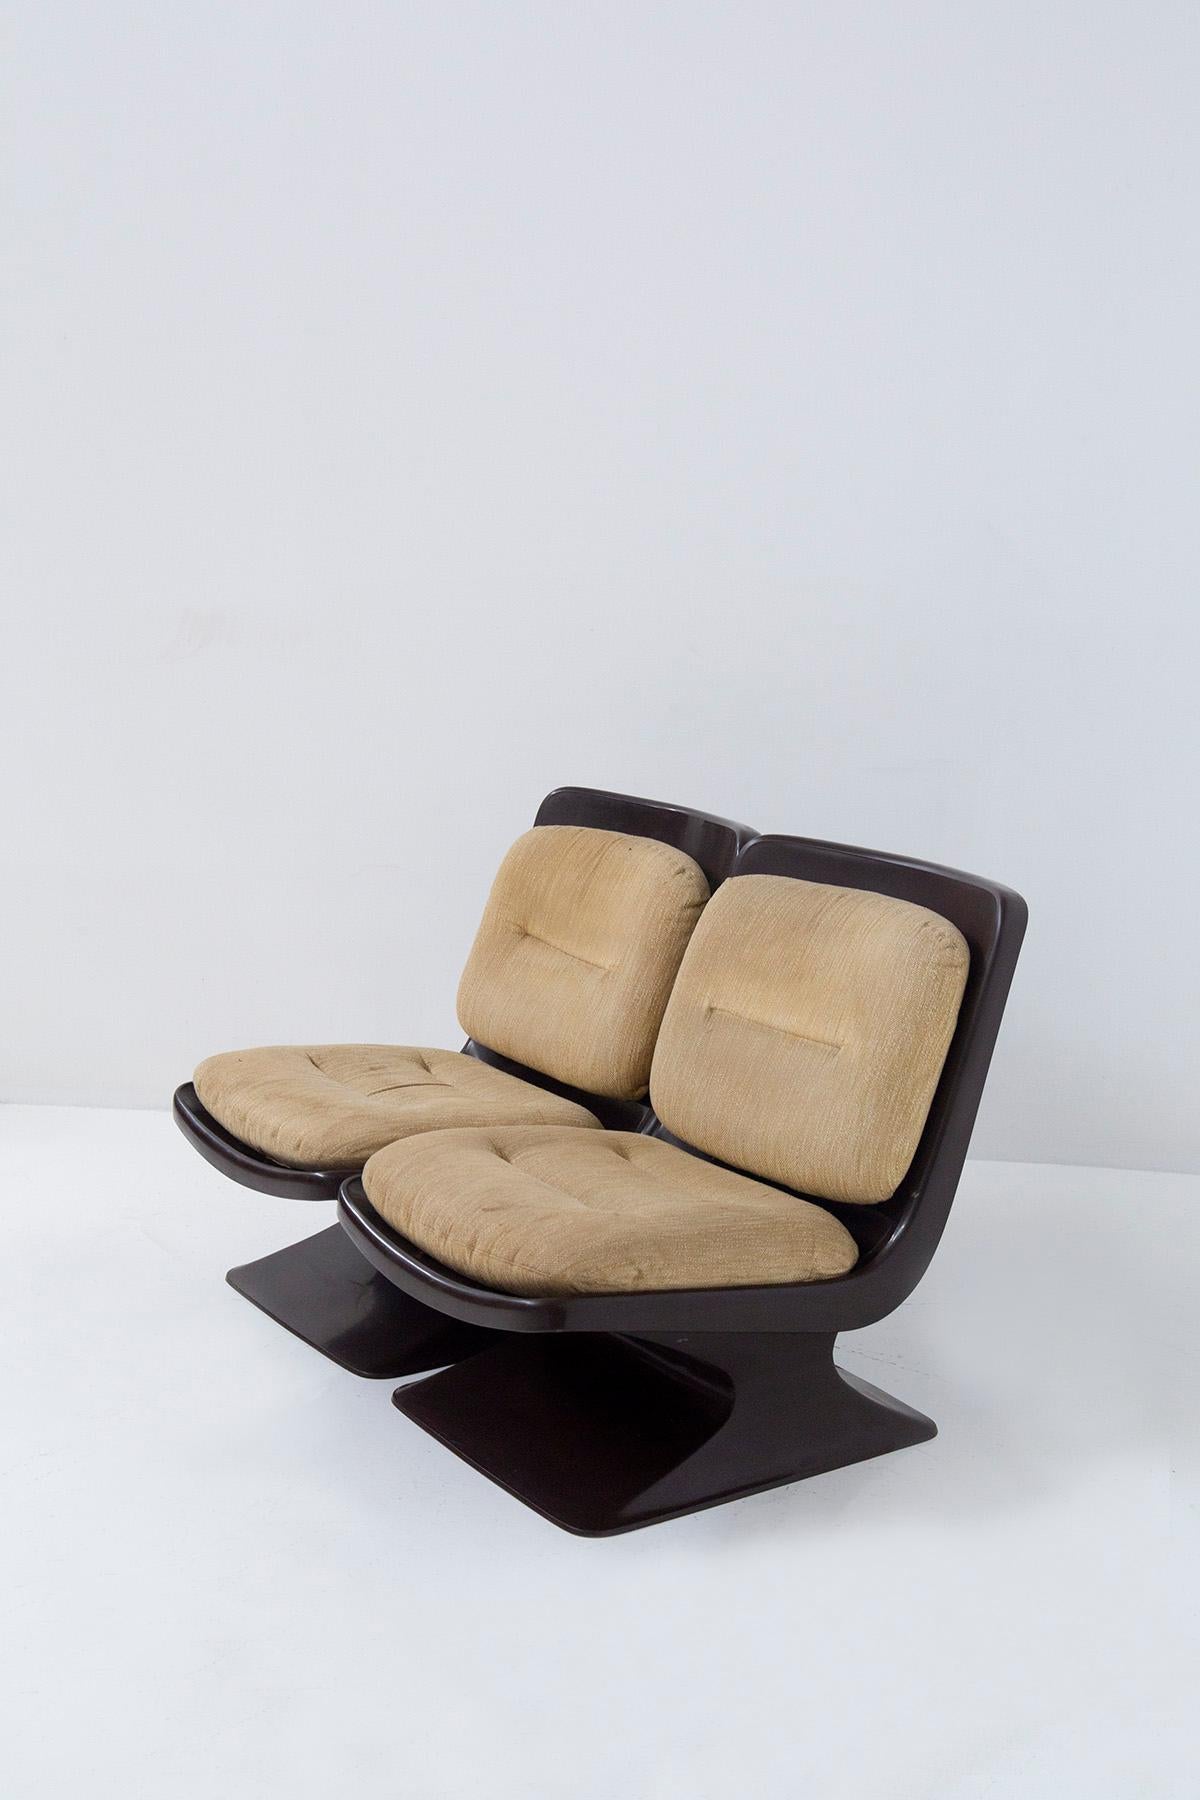 Space Age Albert Jacob Set of three armchairs by Grosfillex in brown plastic, France 